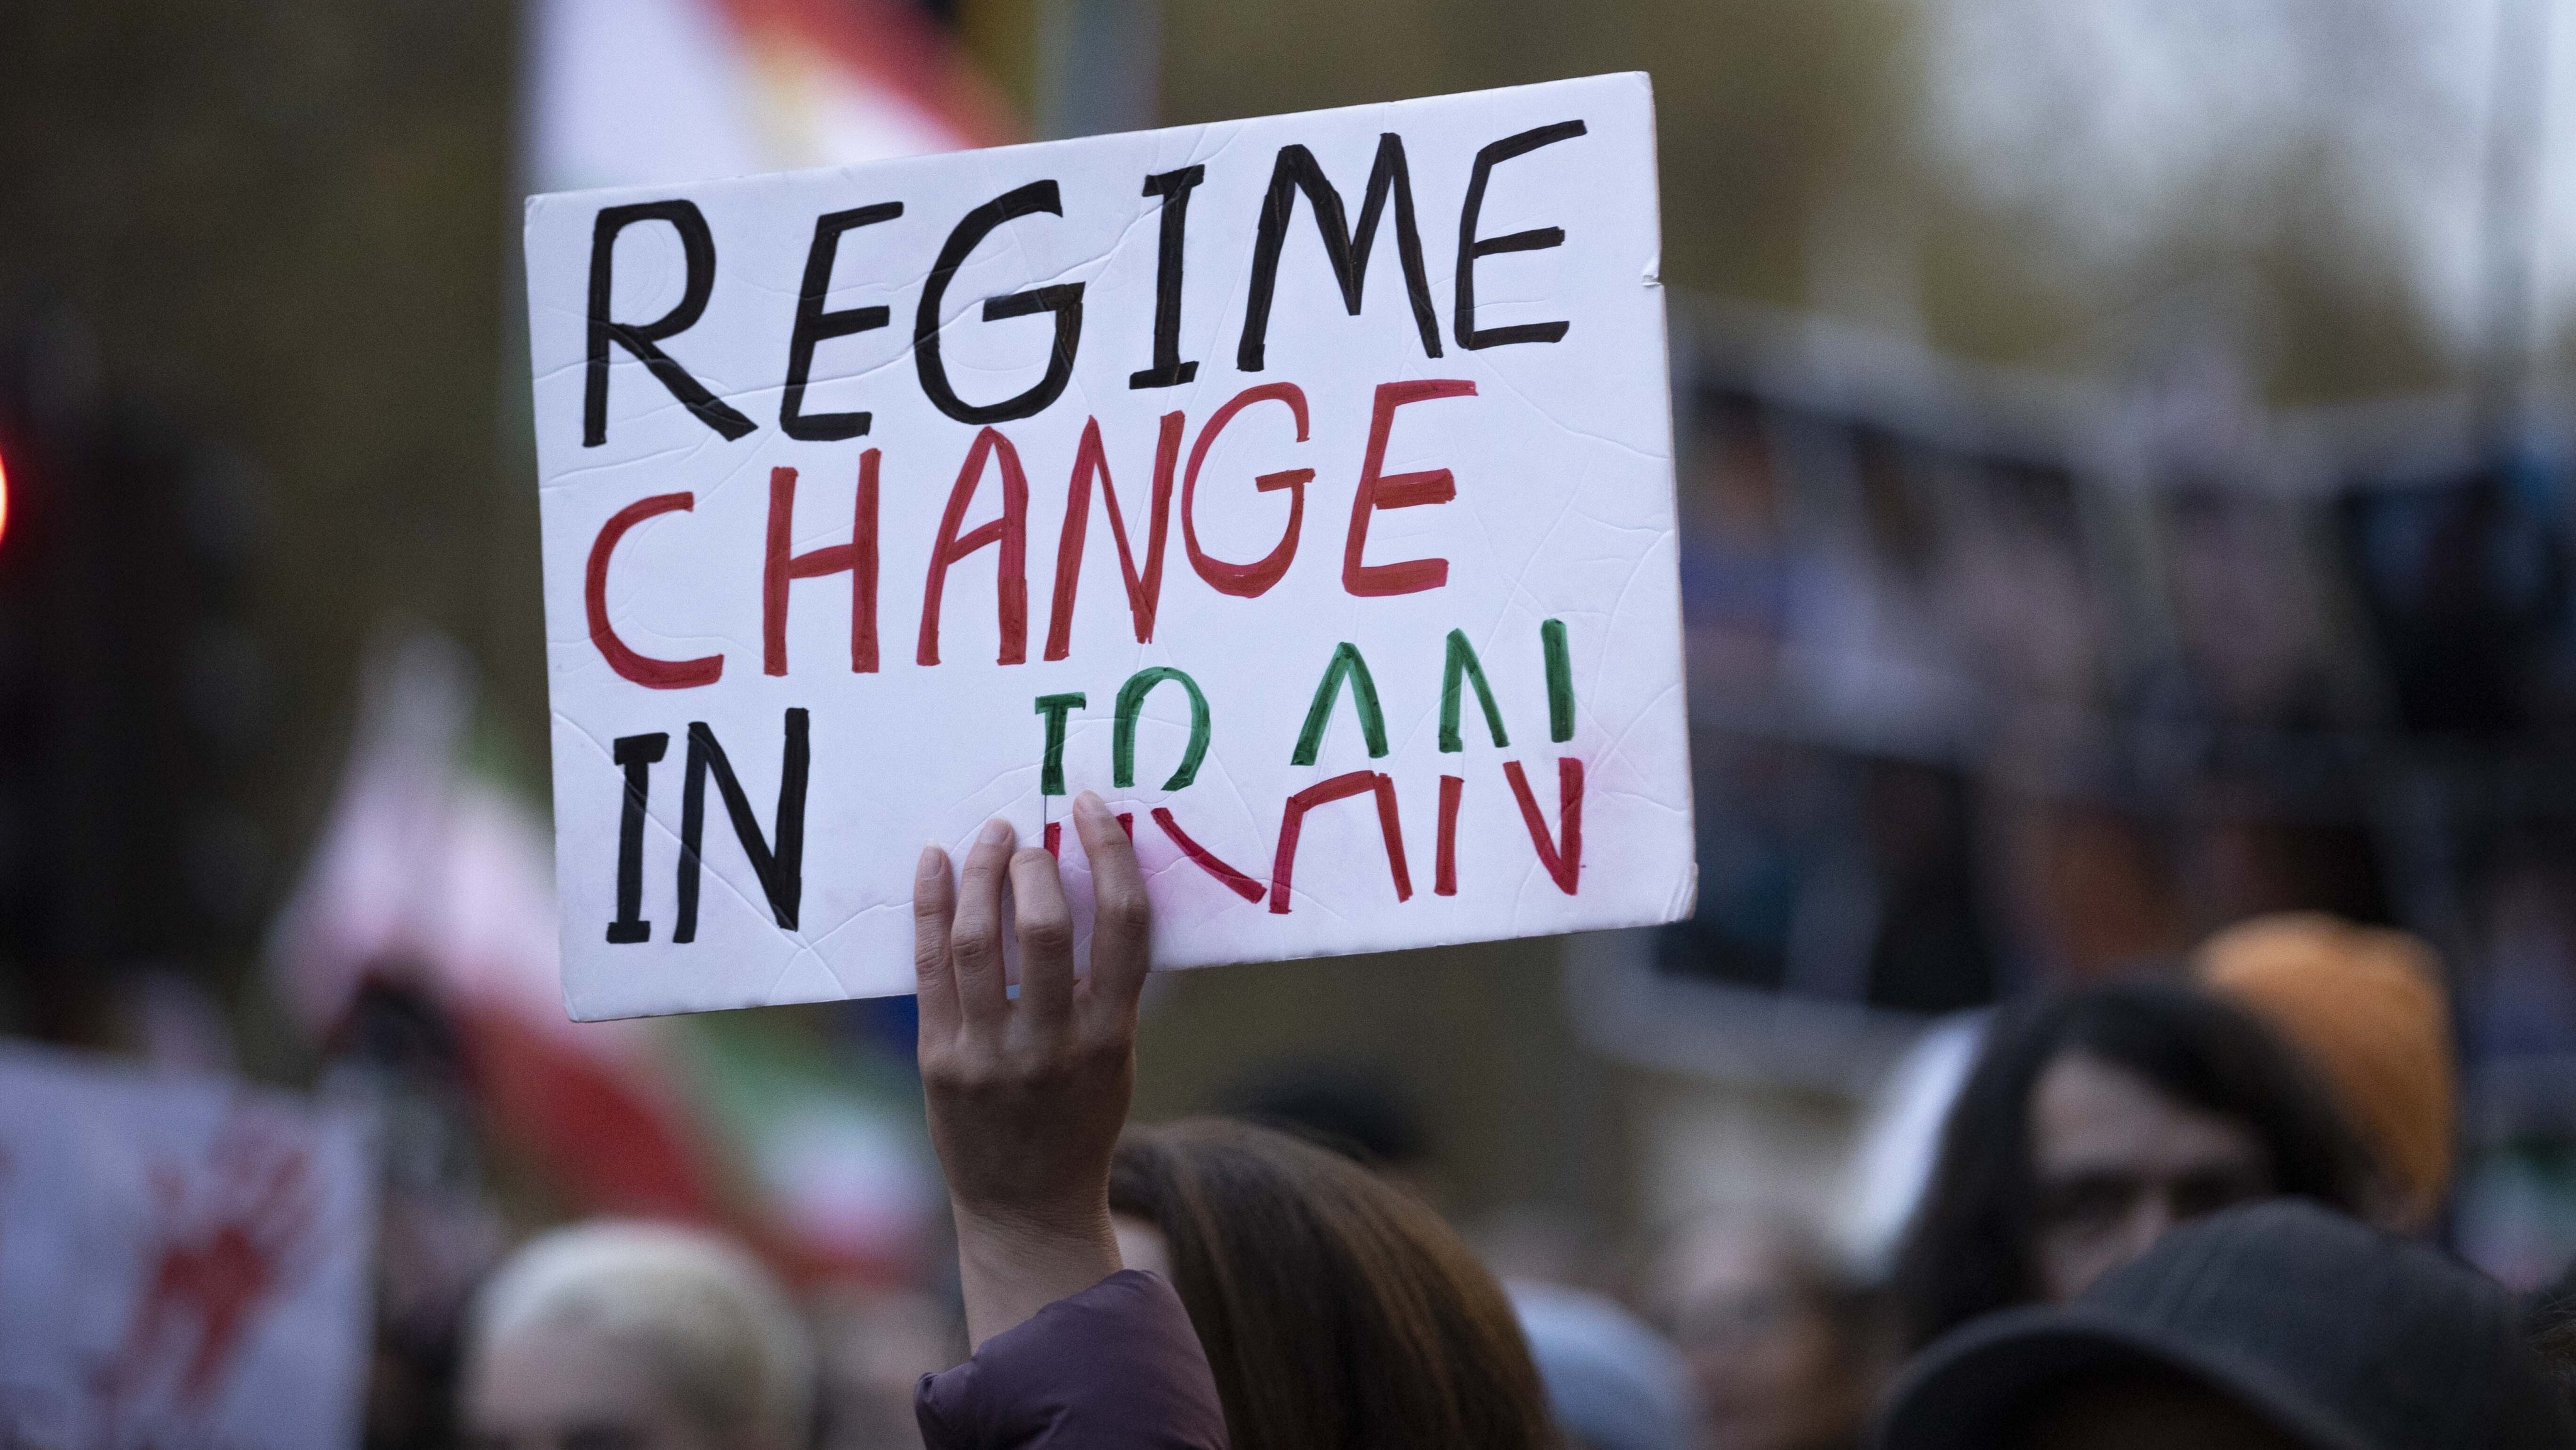 March in London in support of the demonstrations that started in Iran